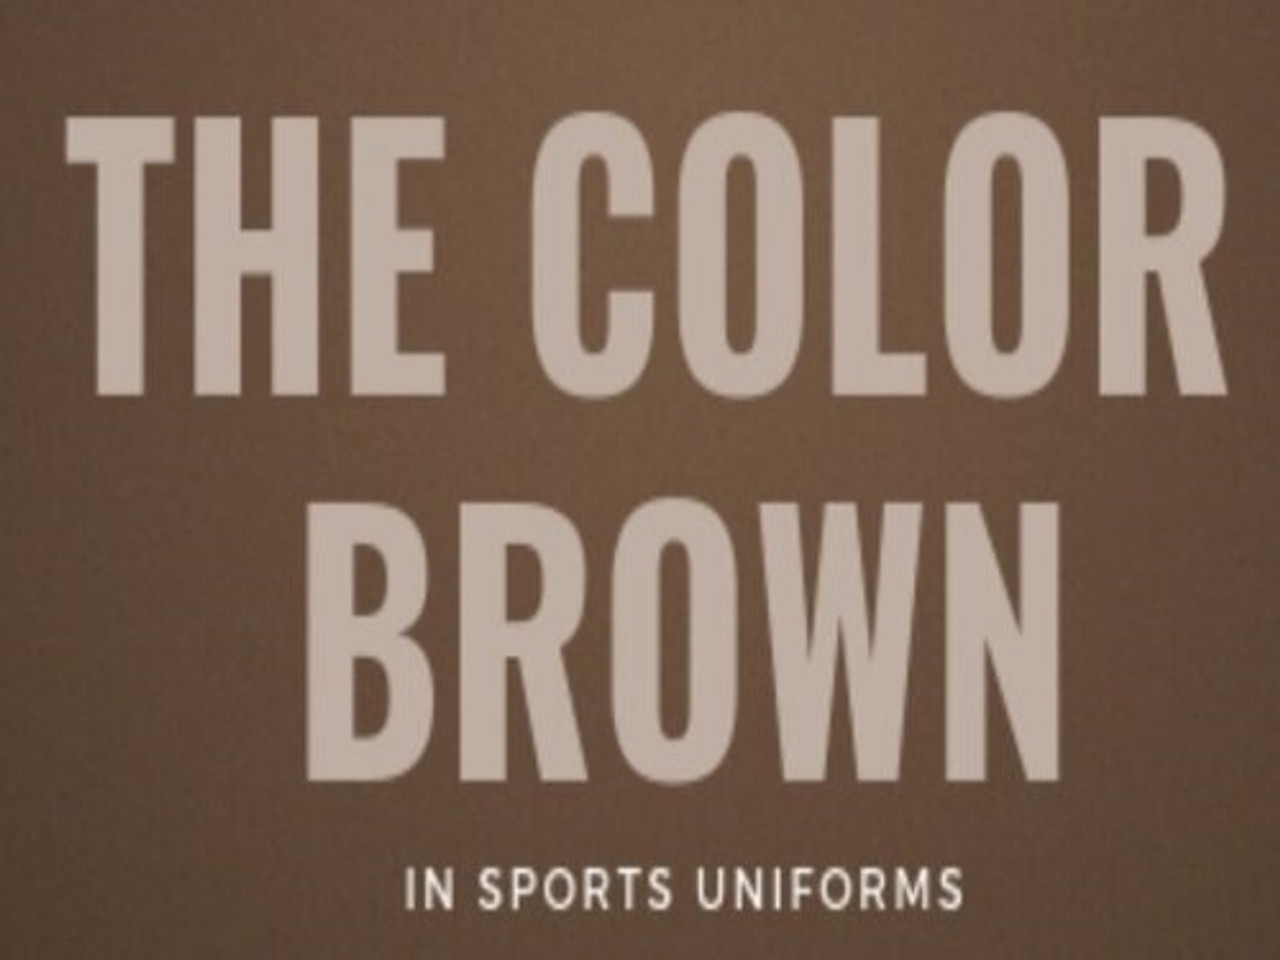 The Use of Brown in Sports Uniforms